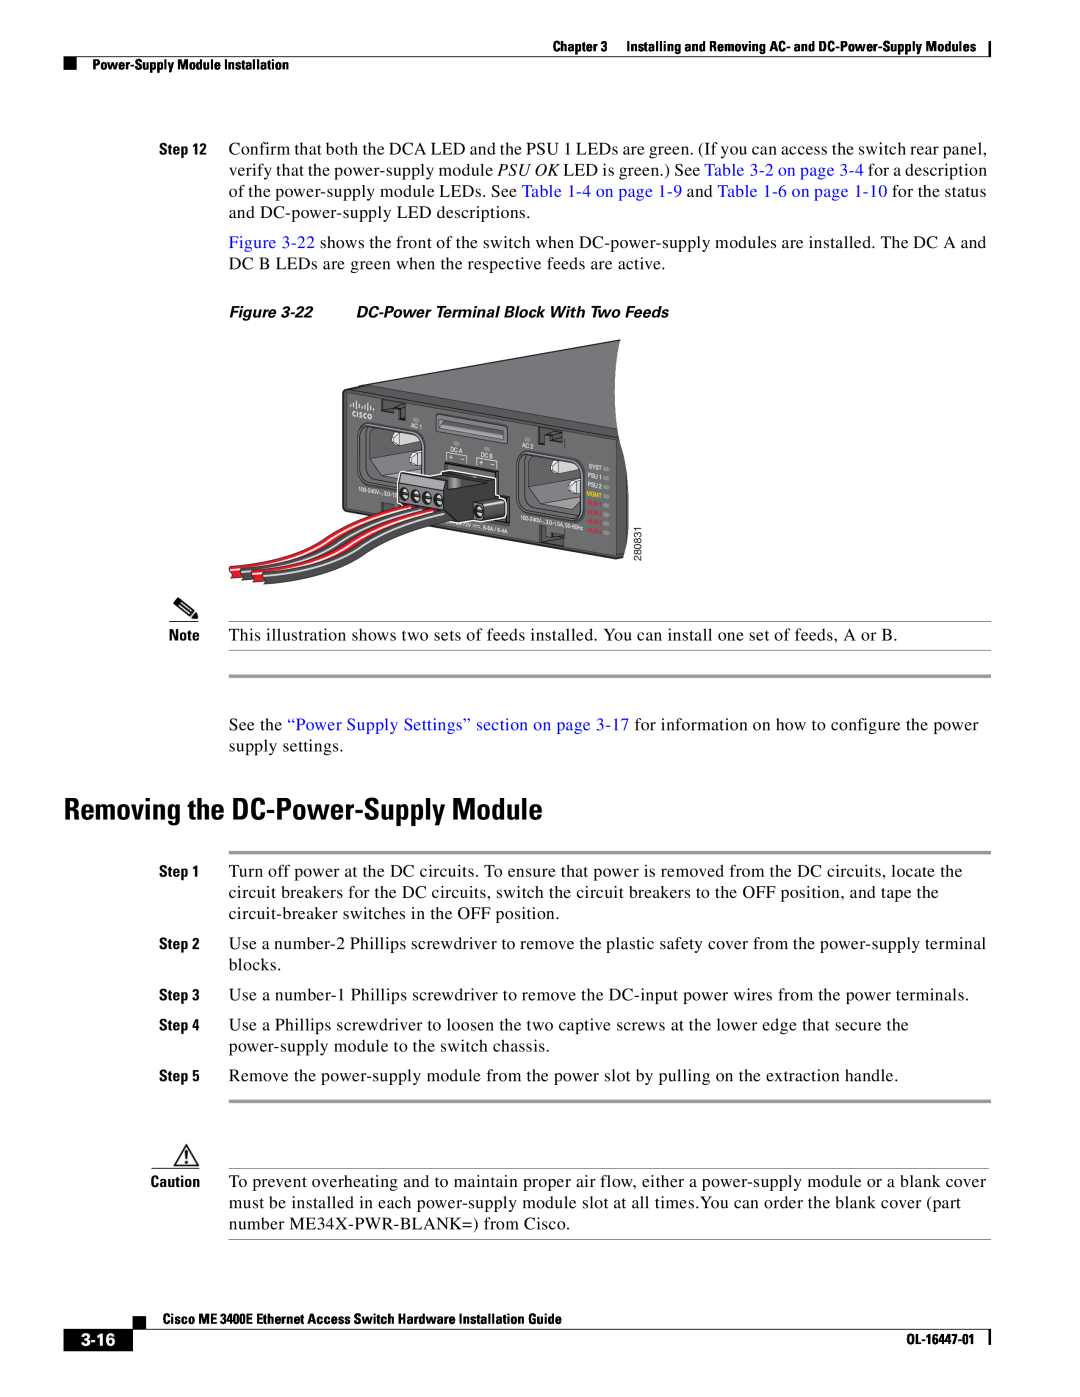 Cisco Systems OL-16447-01 manual Removing the DC-Power-Supply Module, 3-16, 22 DC-Power Terminal Block With Two Feeds 